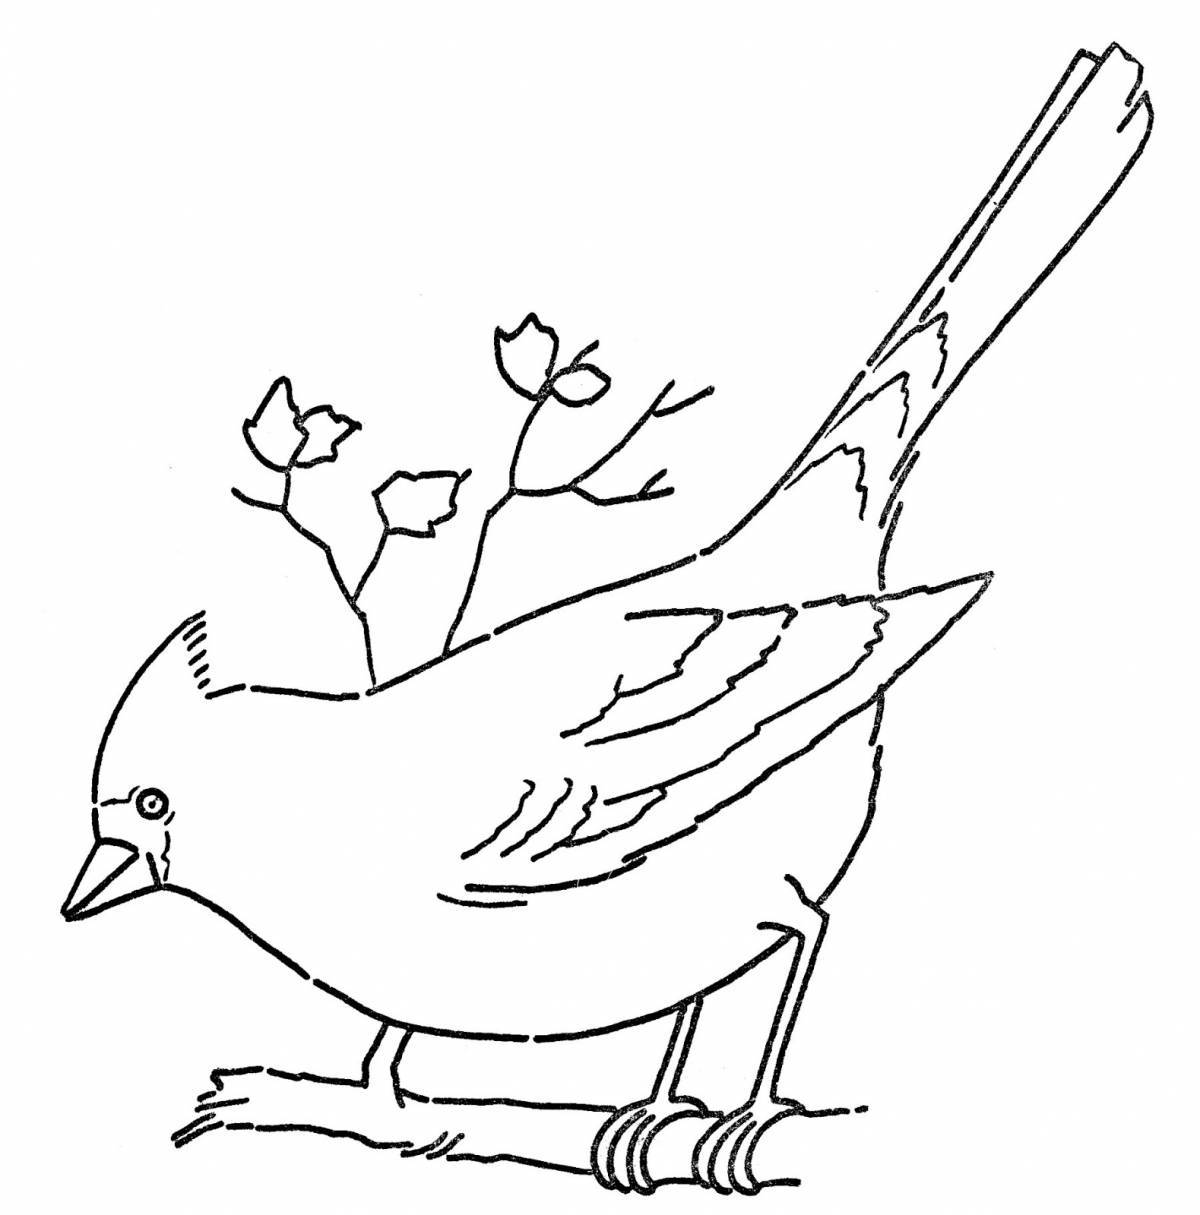 Vibrant waxwing coloring page